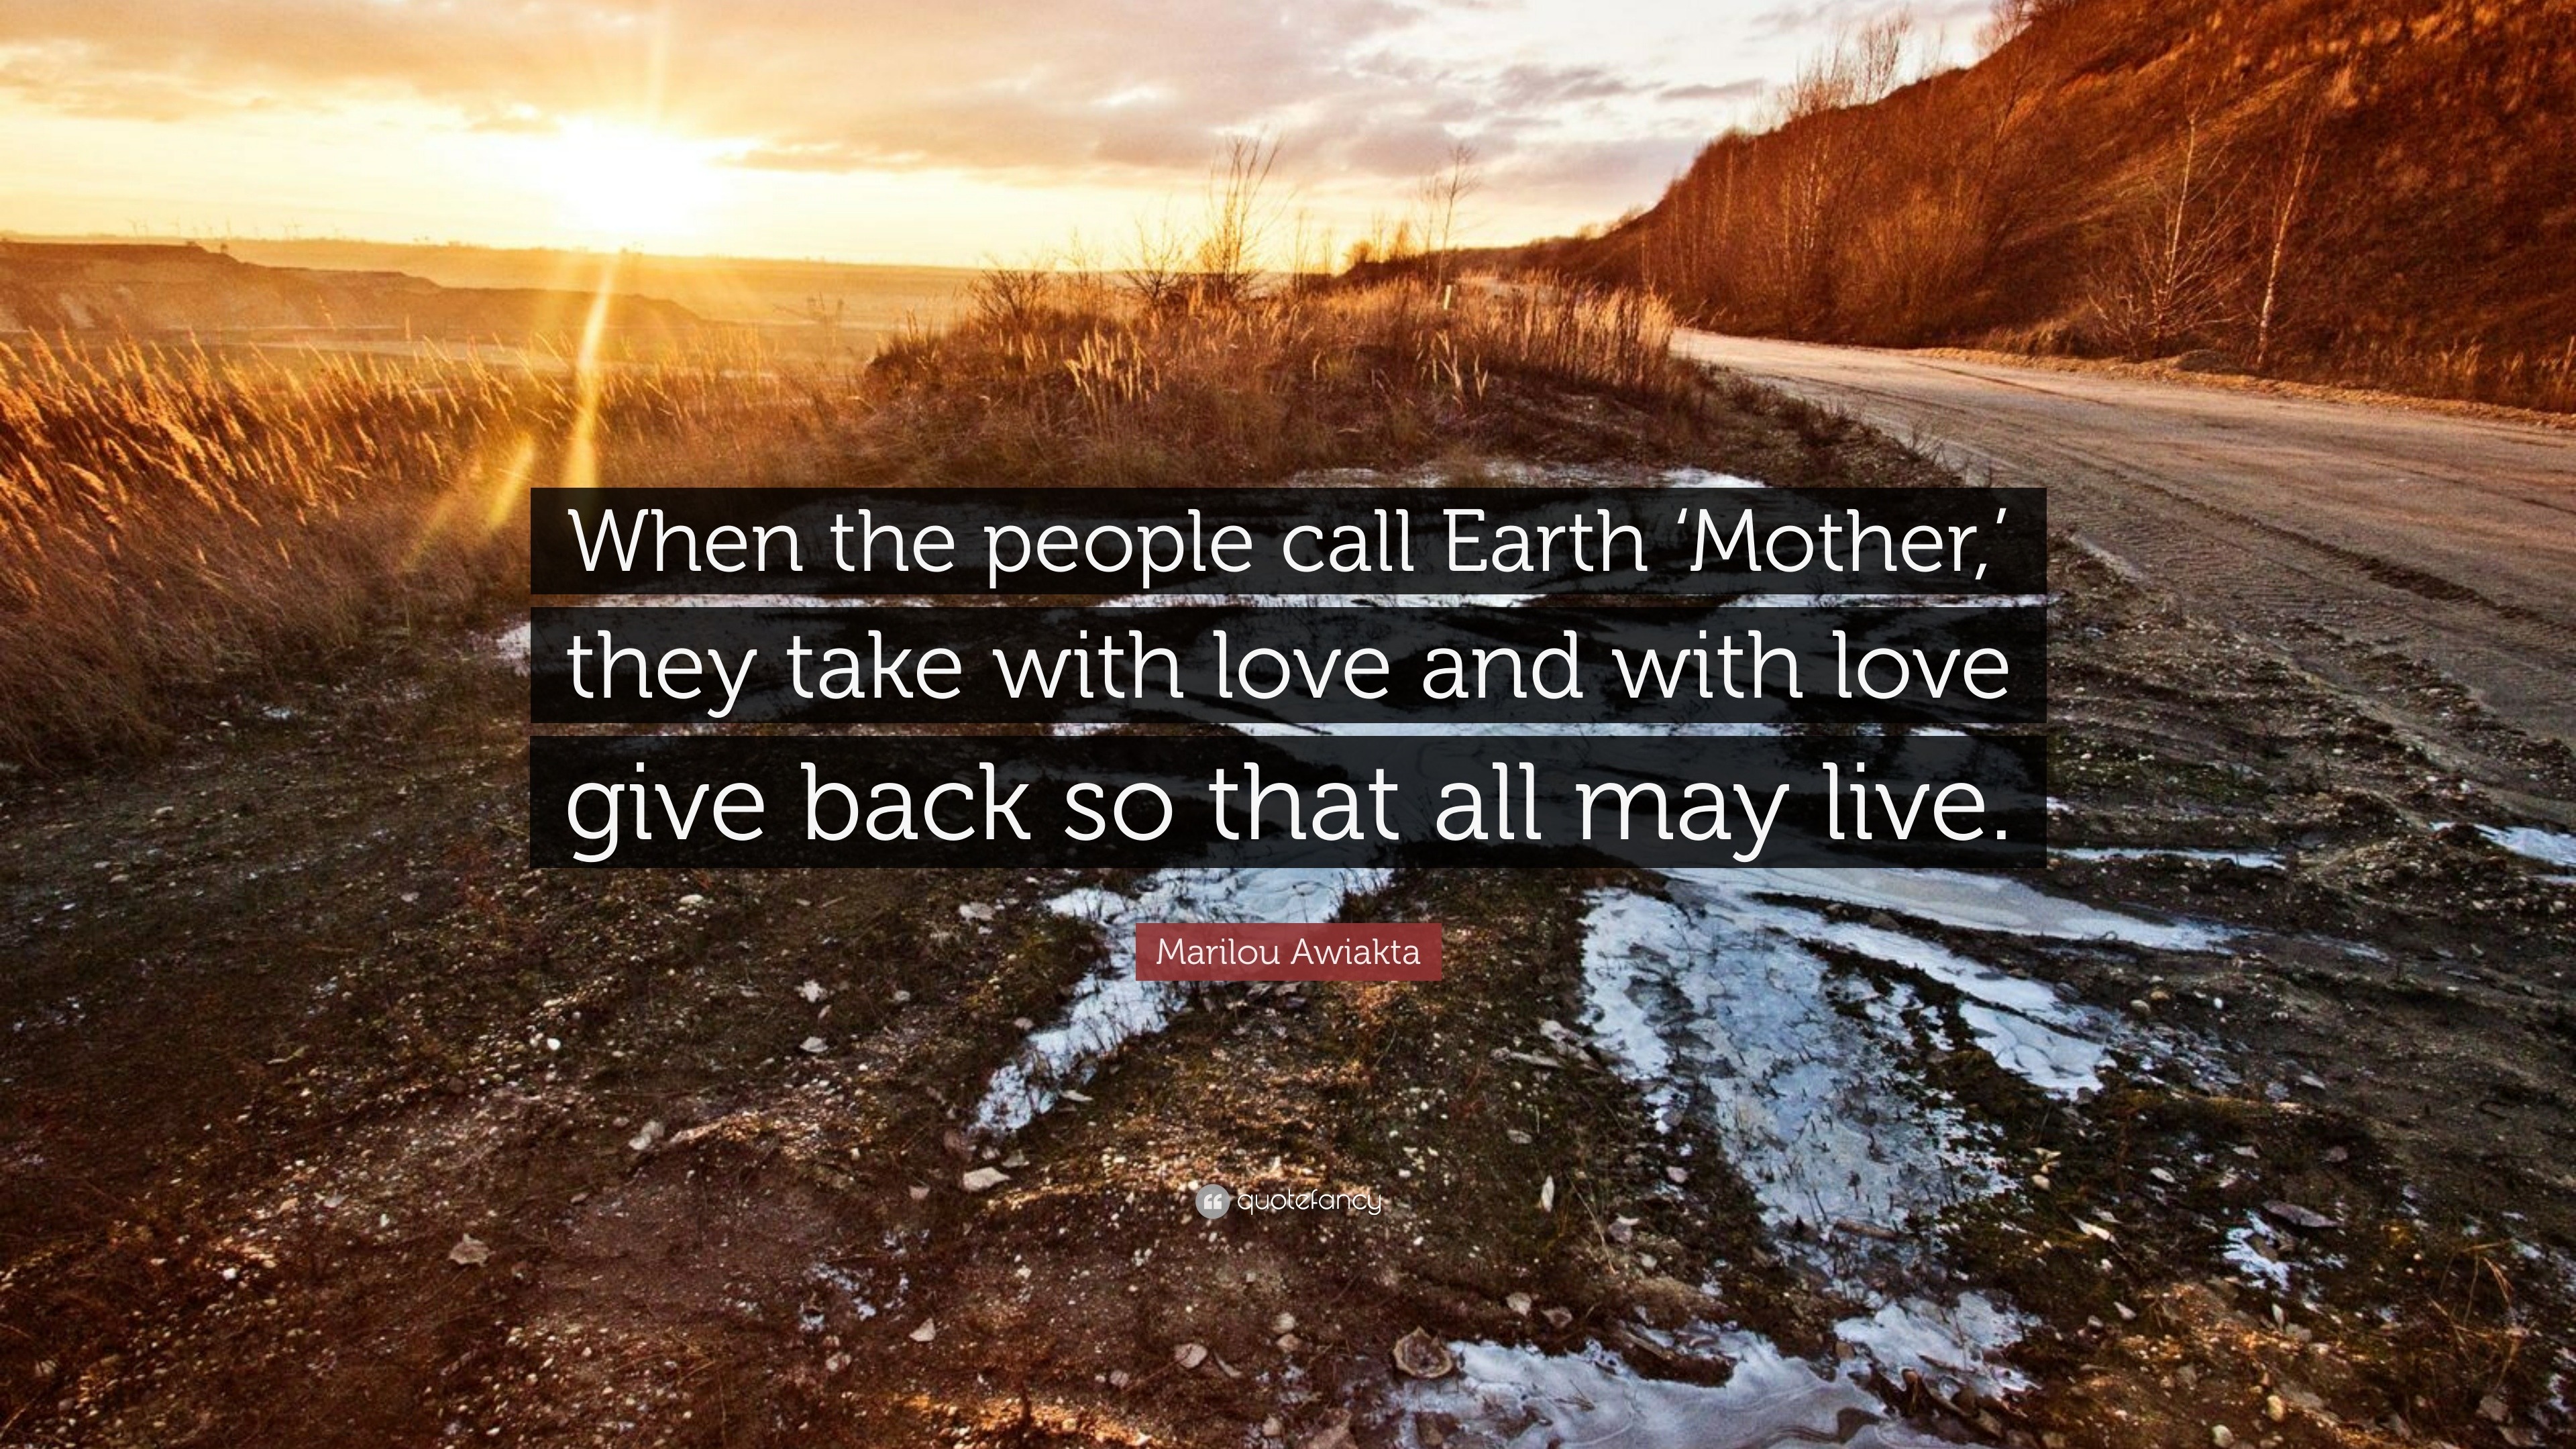 Marilou Awiakta Quote: “When the people call Earth ‘Mother,’ they take ...